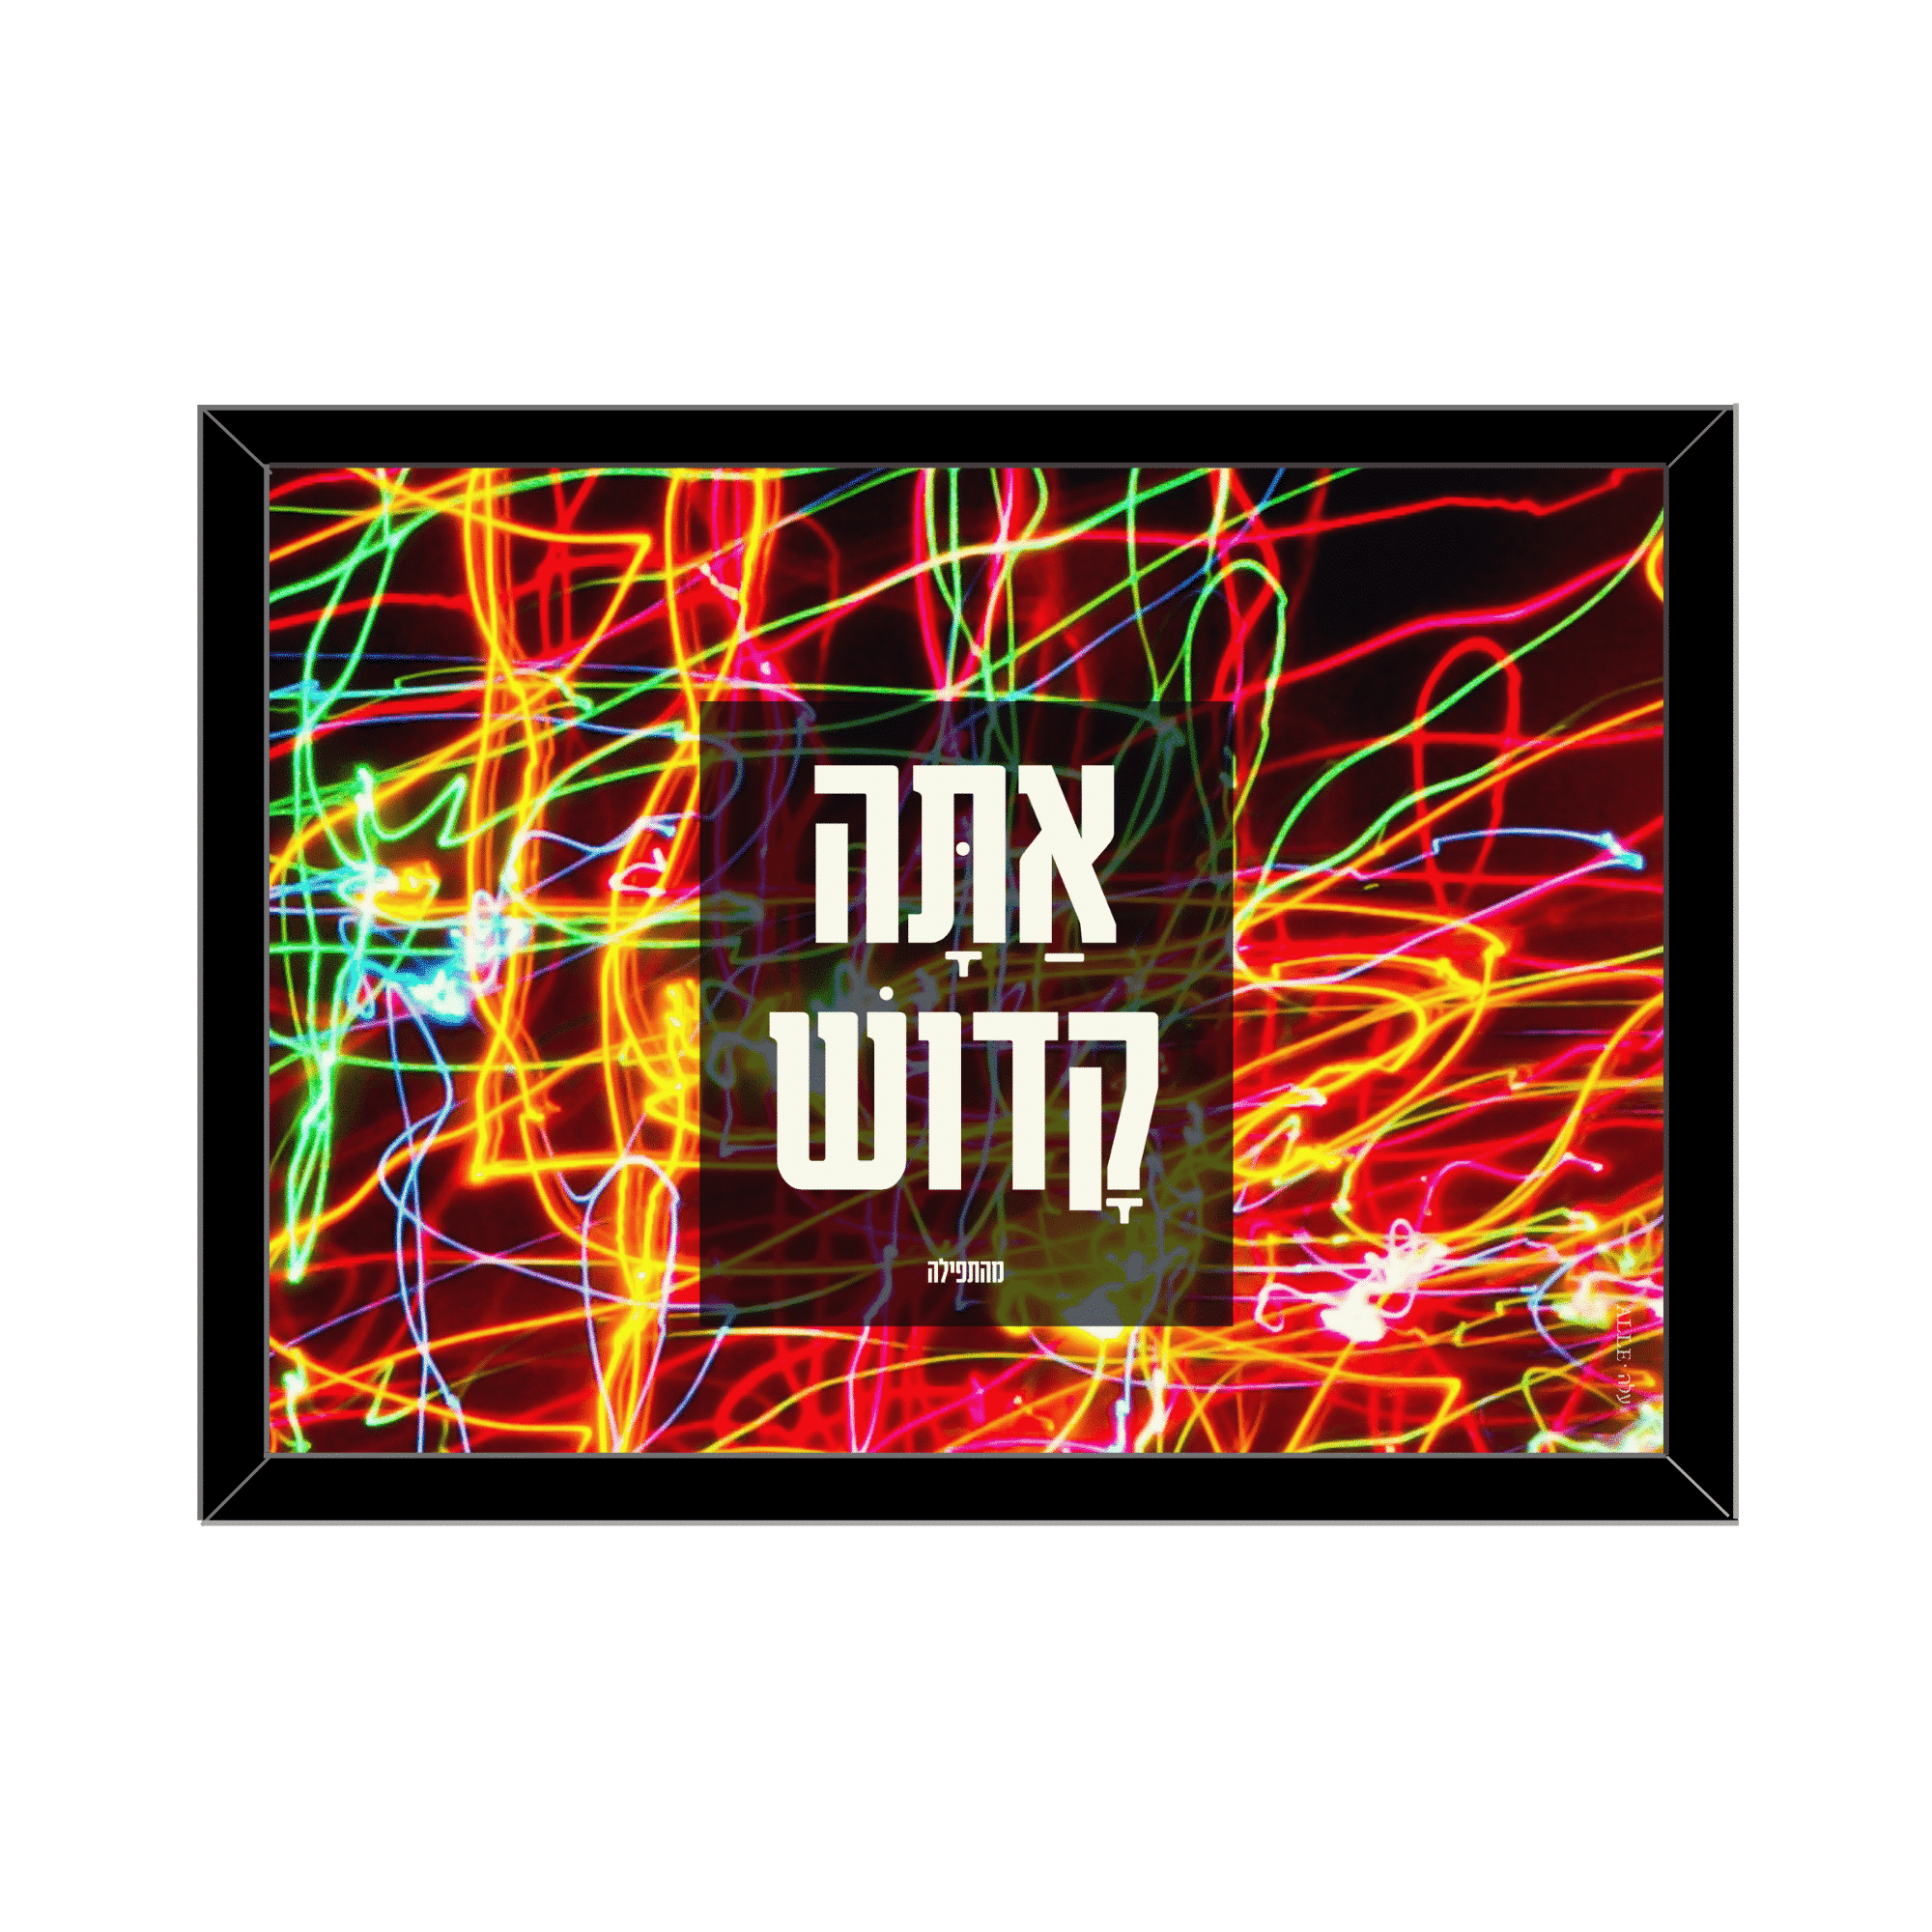 Colorful Wall Hanging With Hebrew Lettering – “You are Holy”